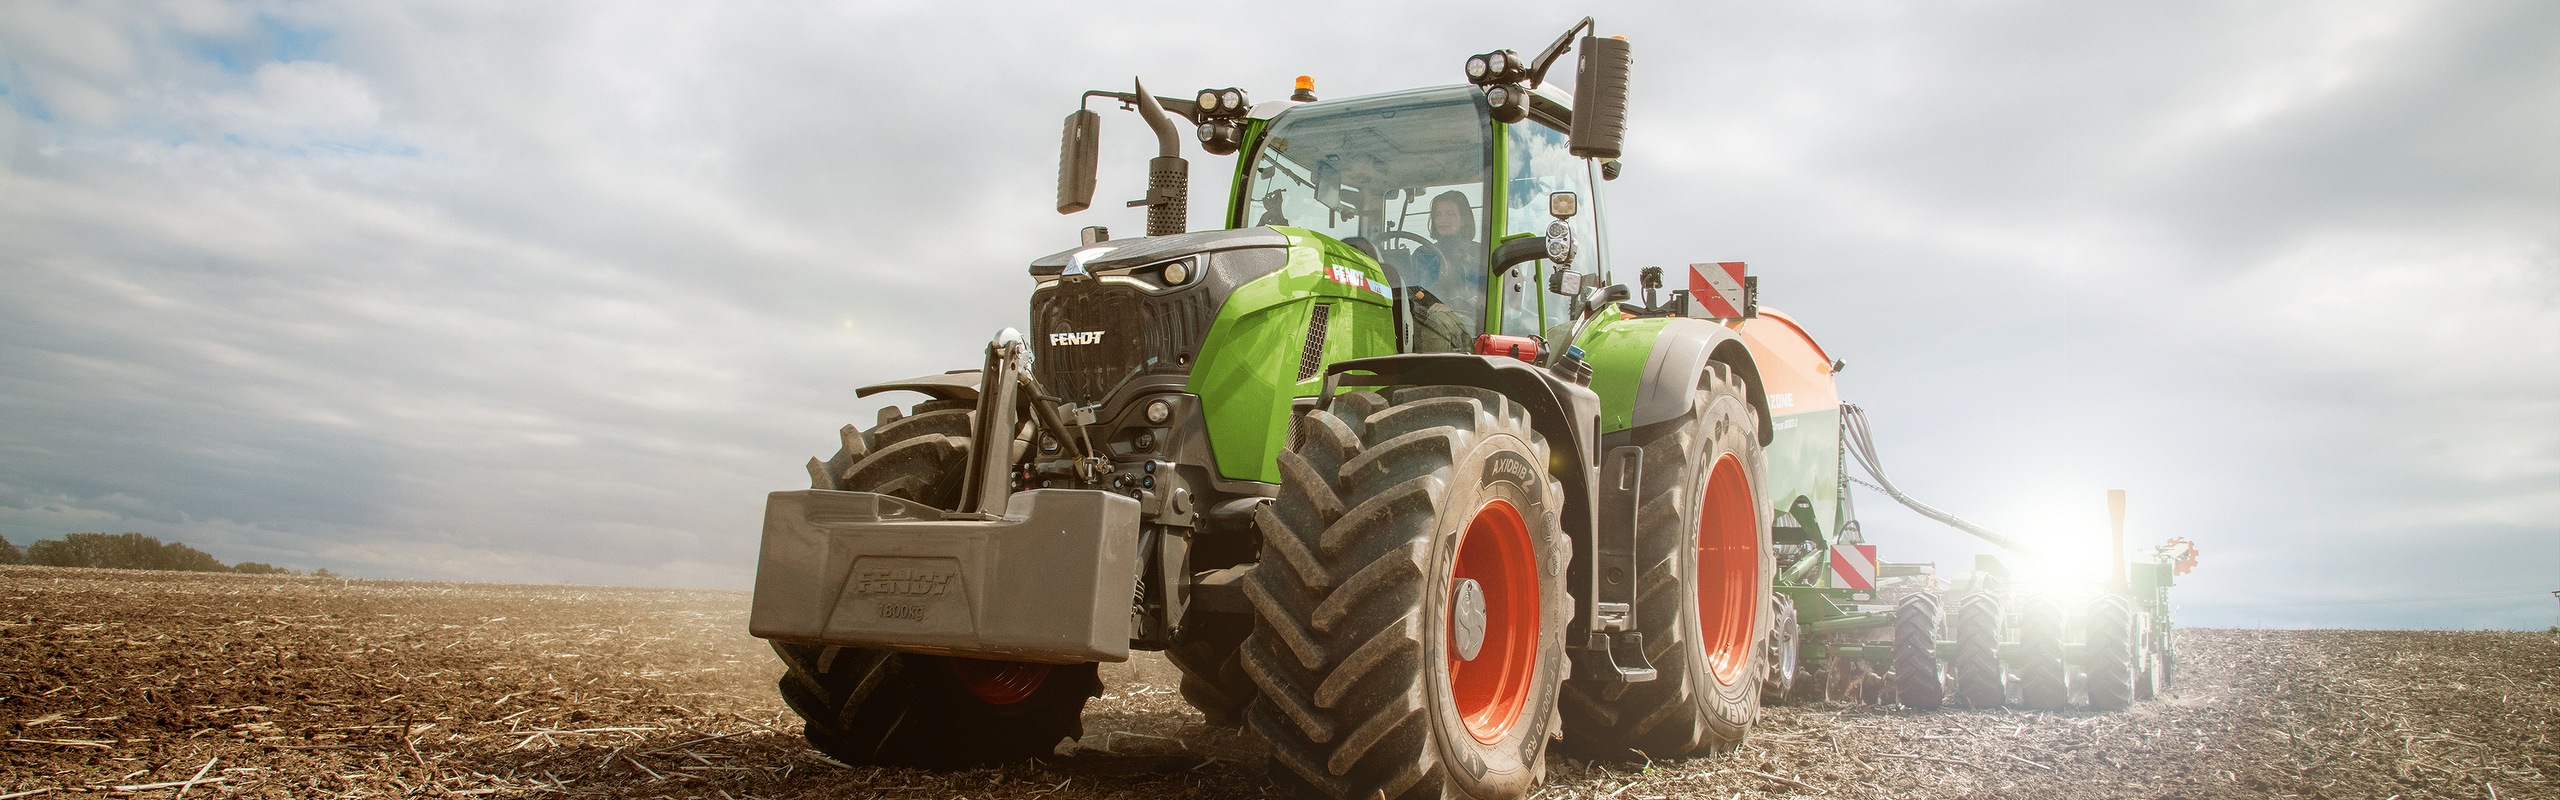 Fendt 700 Vario Gen7 in use on the field with Amazone seed drill.